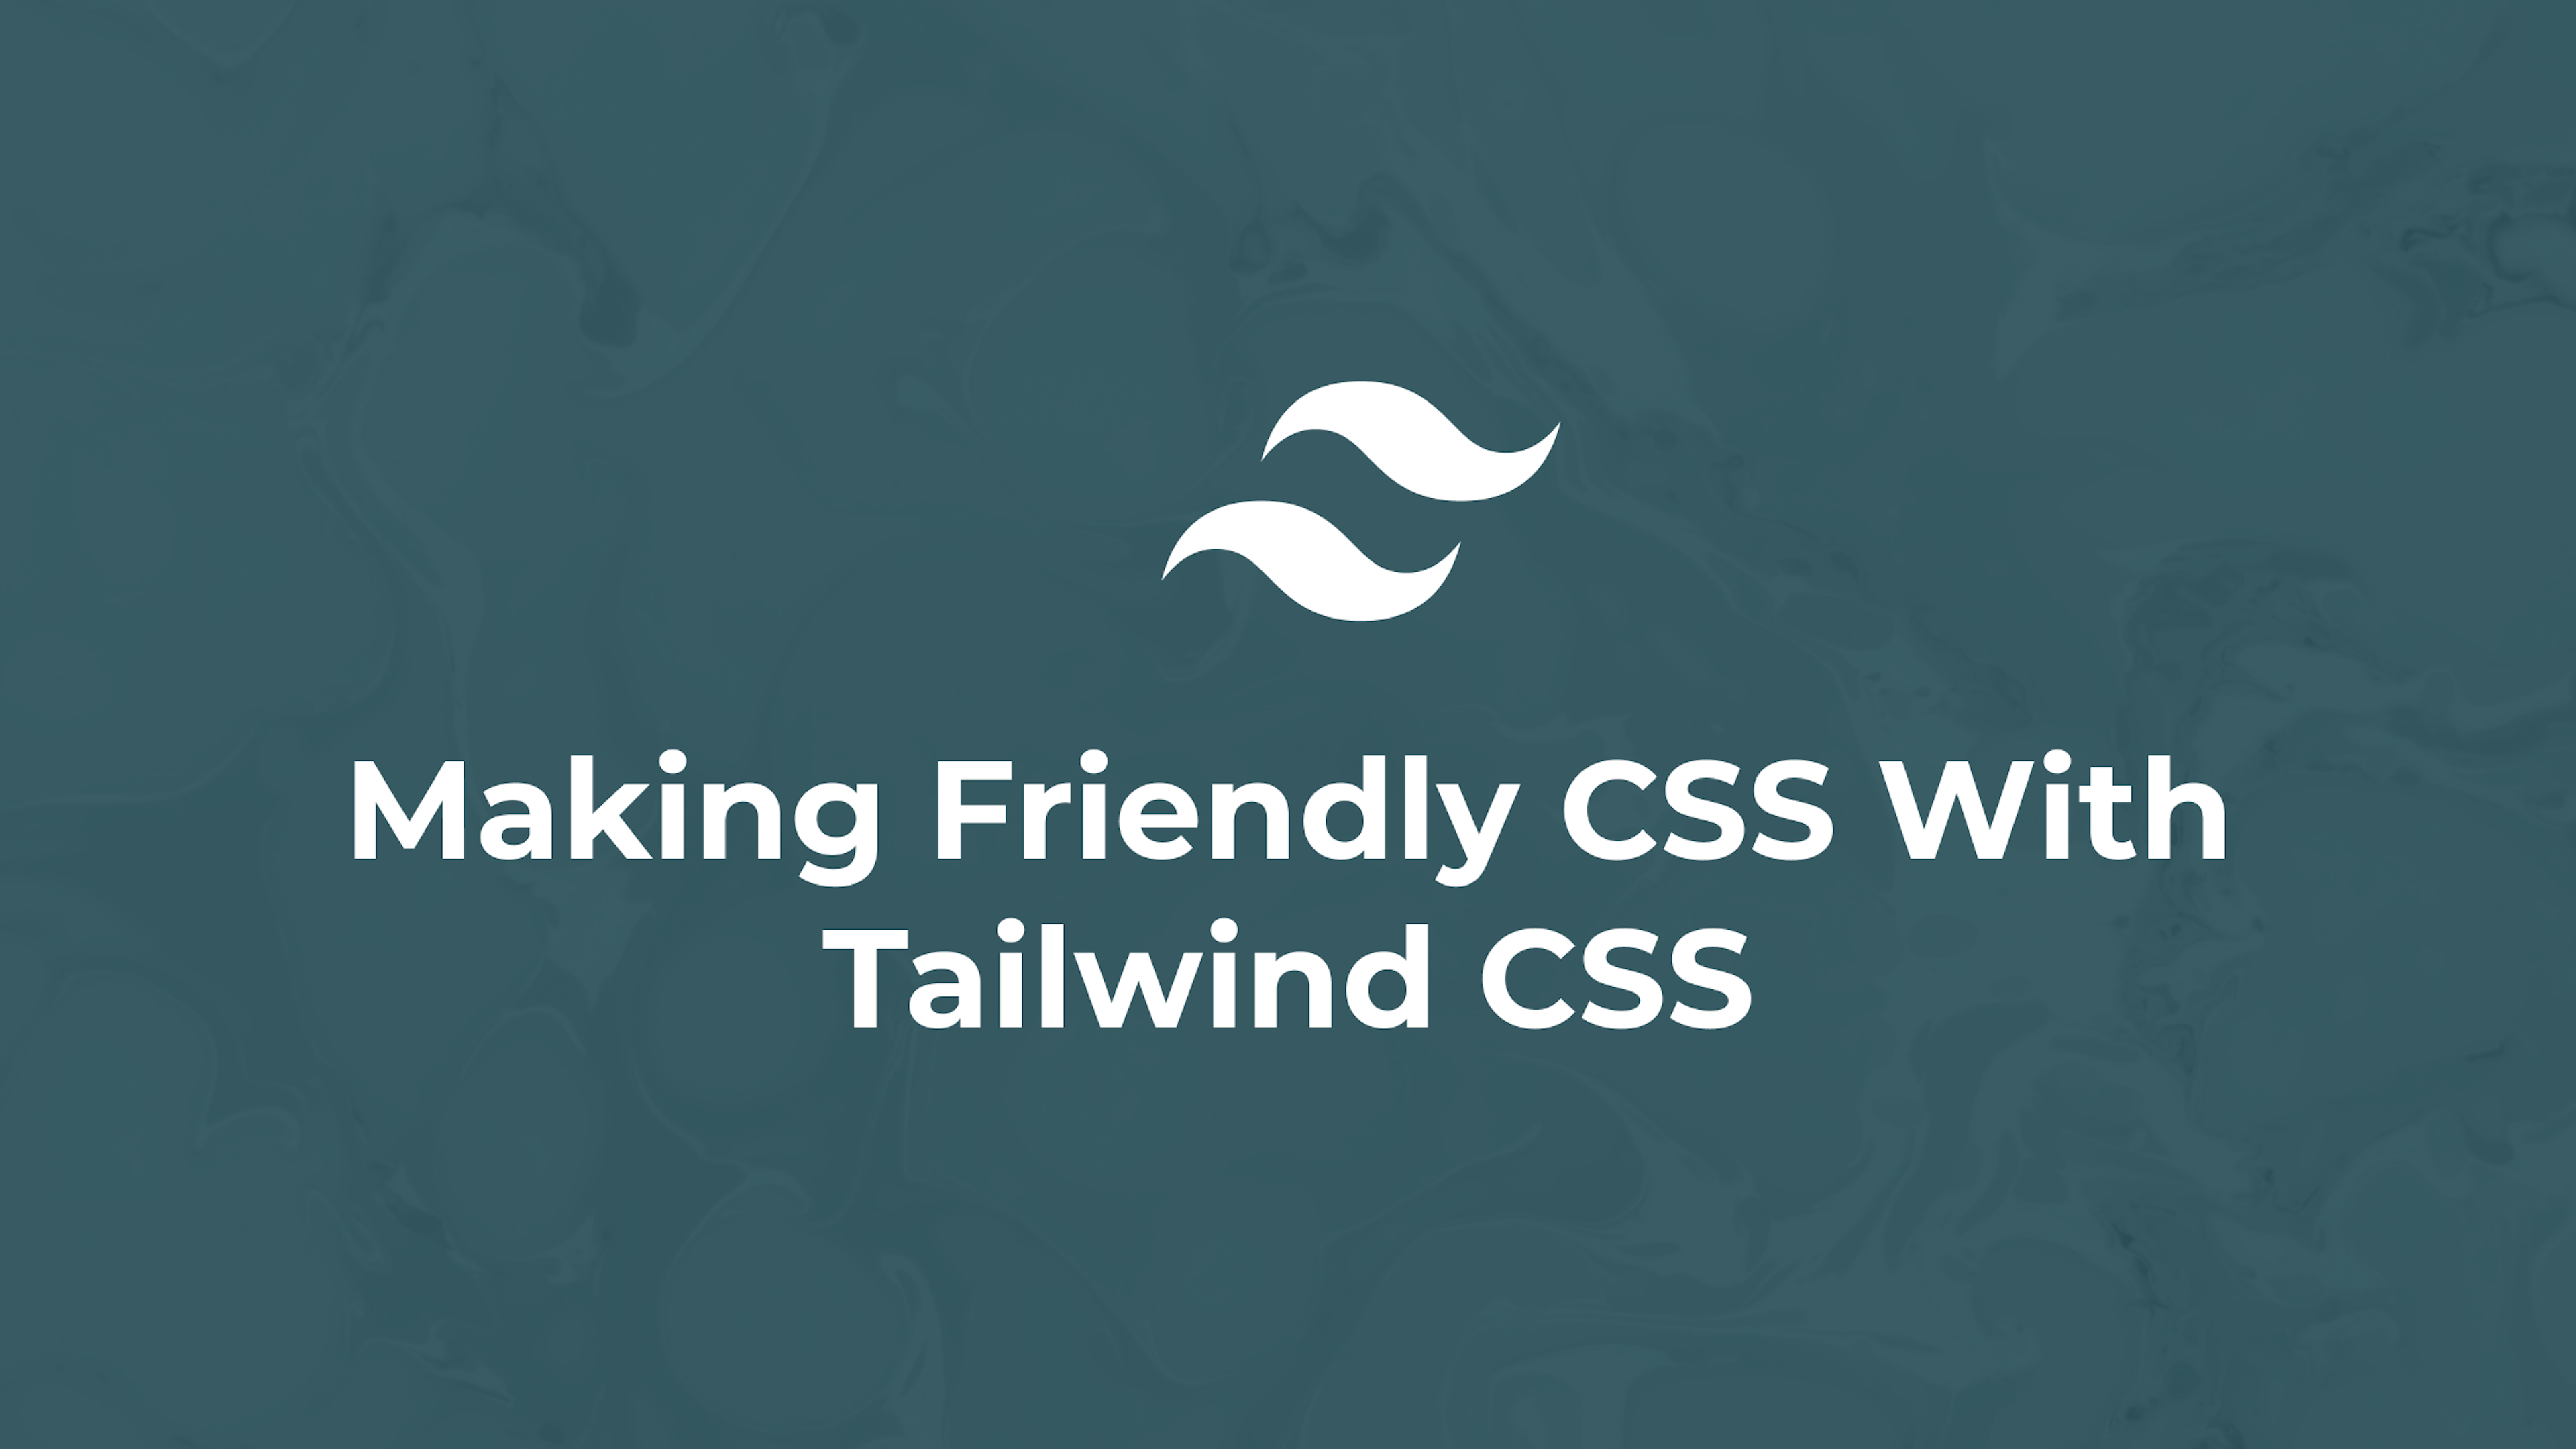 Making Friendly CSS With Tailwind CSS